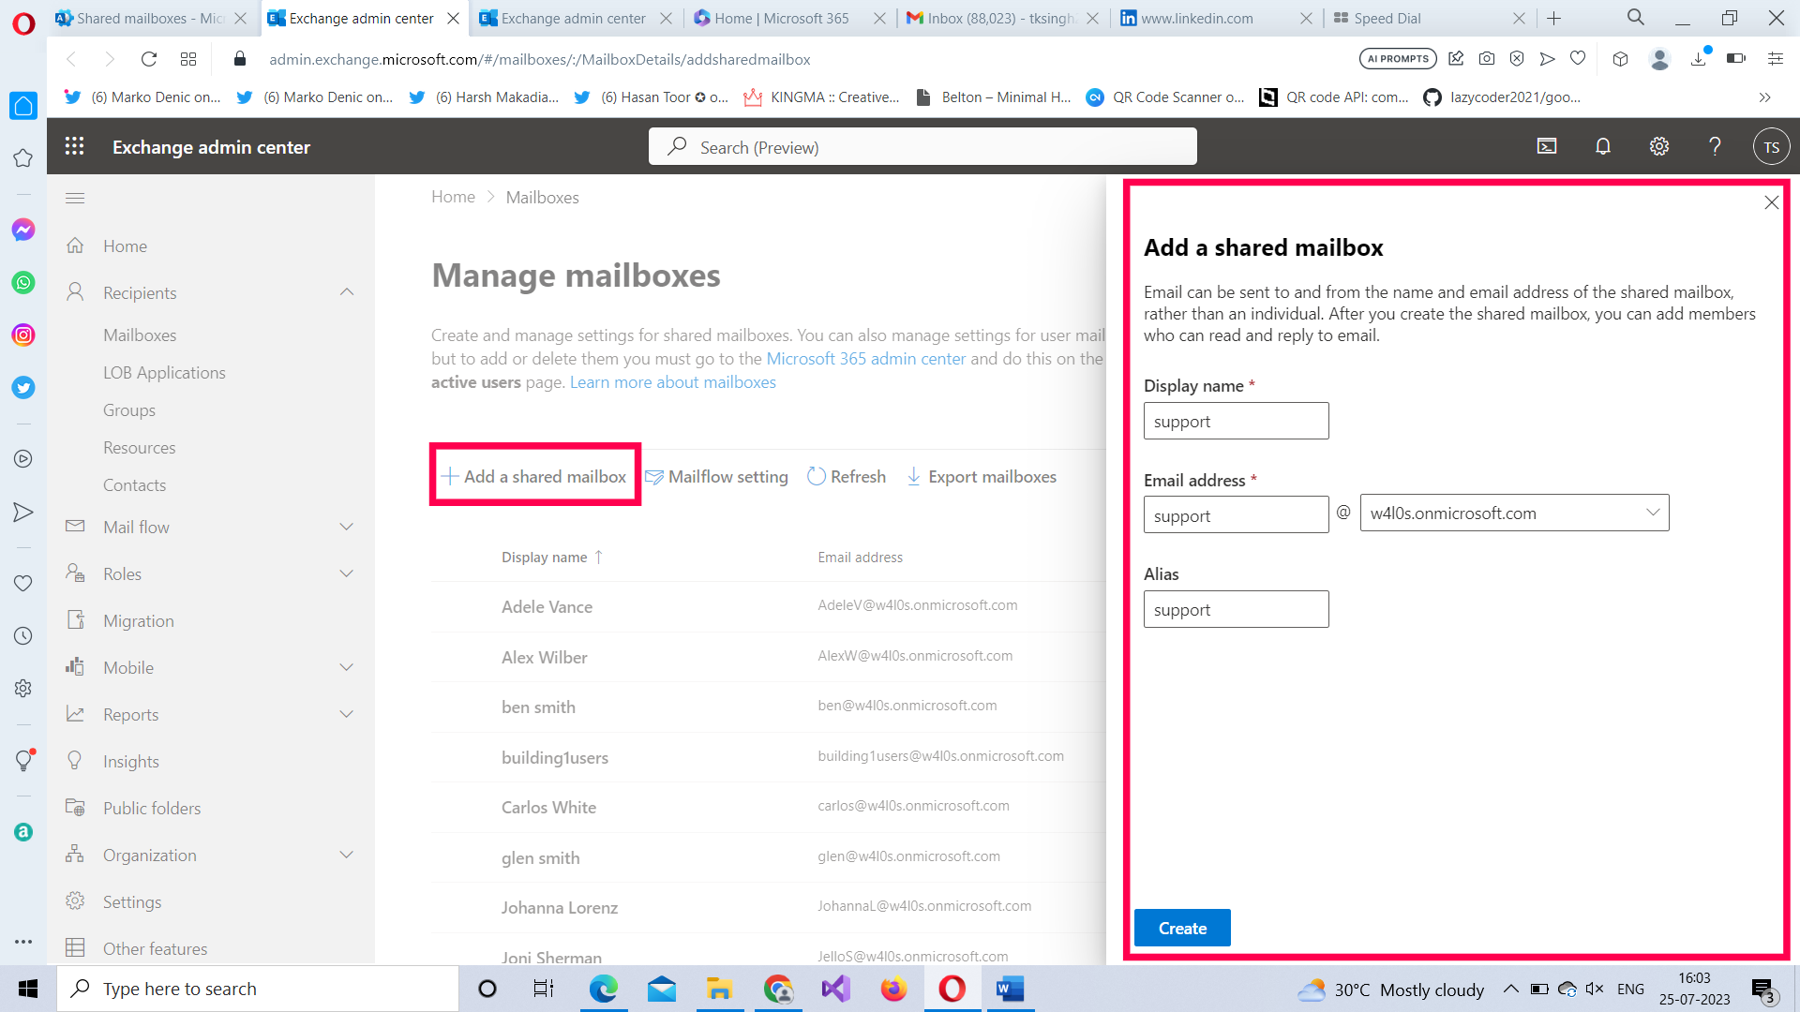 This screenshot shows how you can add a shared mailbox using exchange admin center by adding the required details like display name, email address and alias.